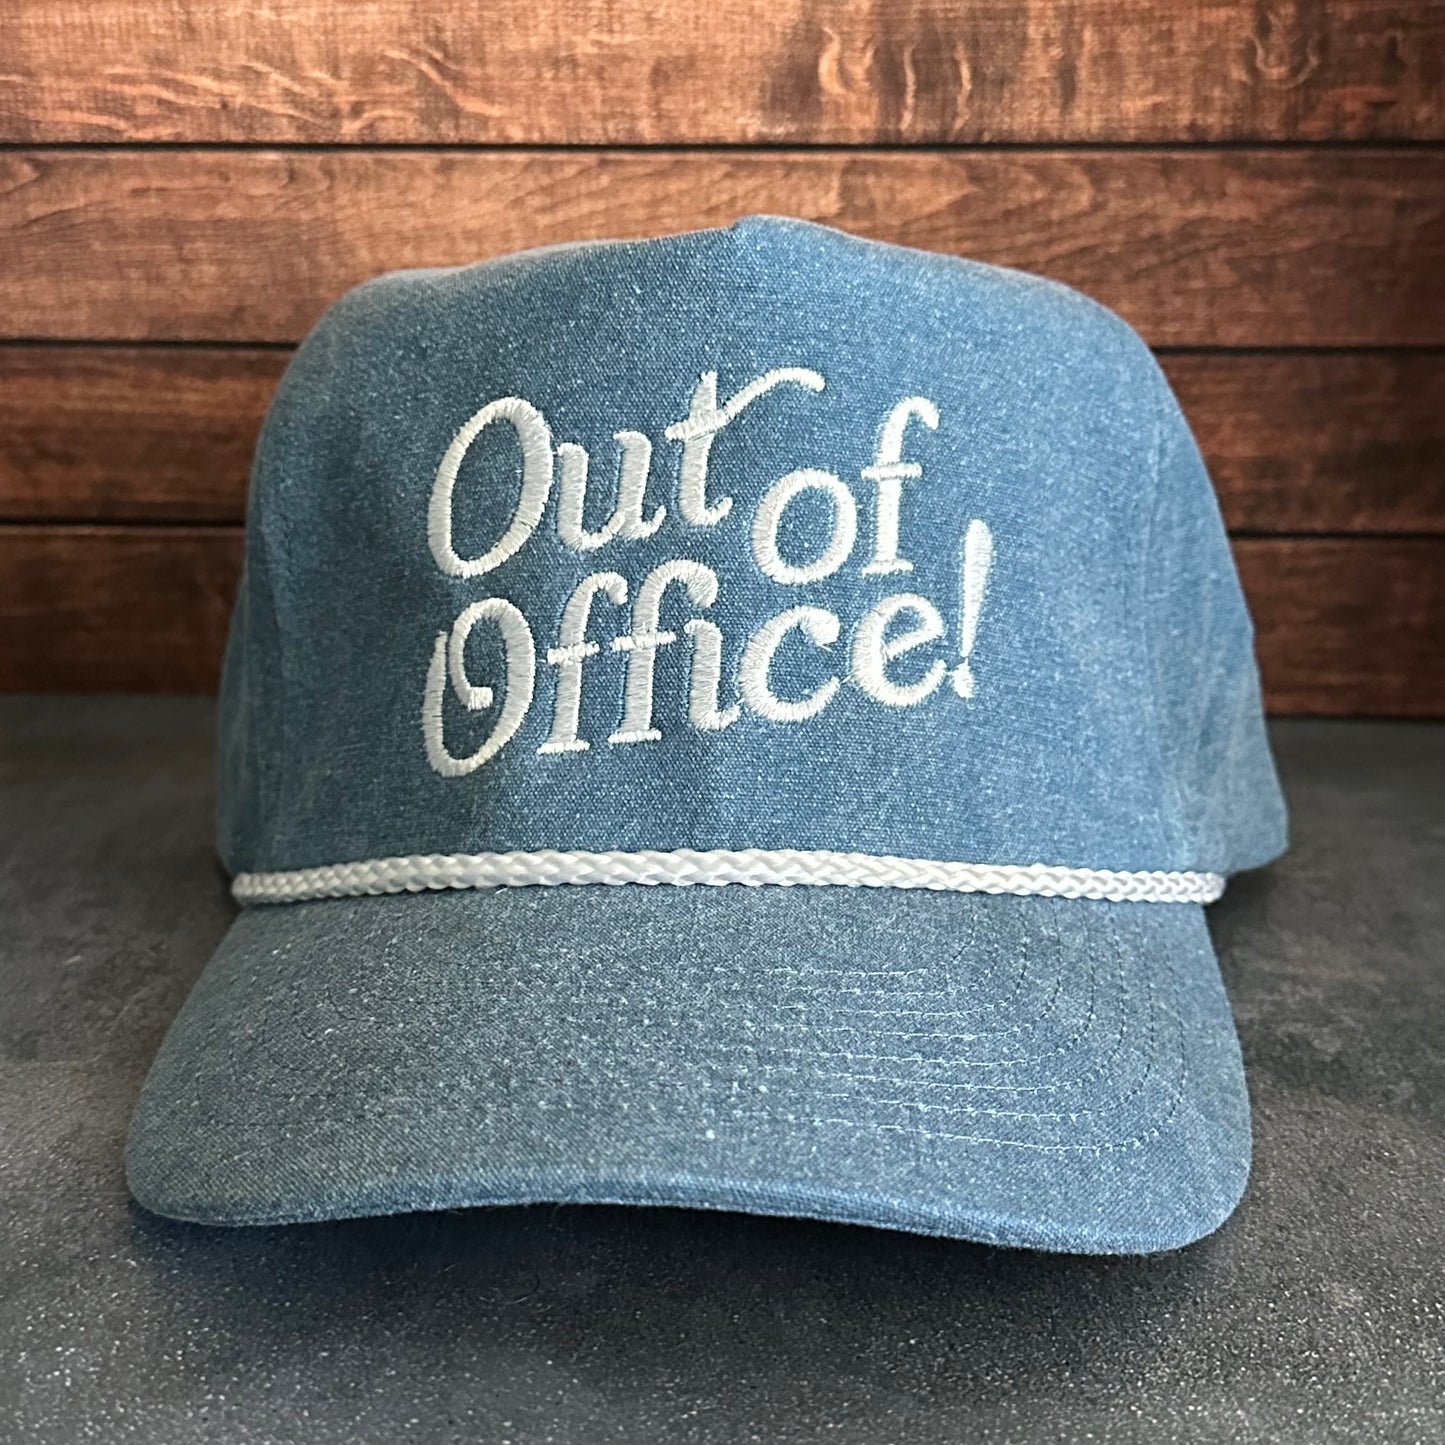 Vintage Style Out of Office Faded Canvas Snapback Trucker Hat